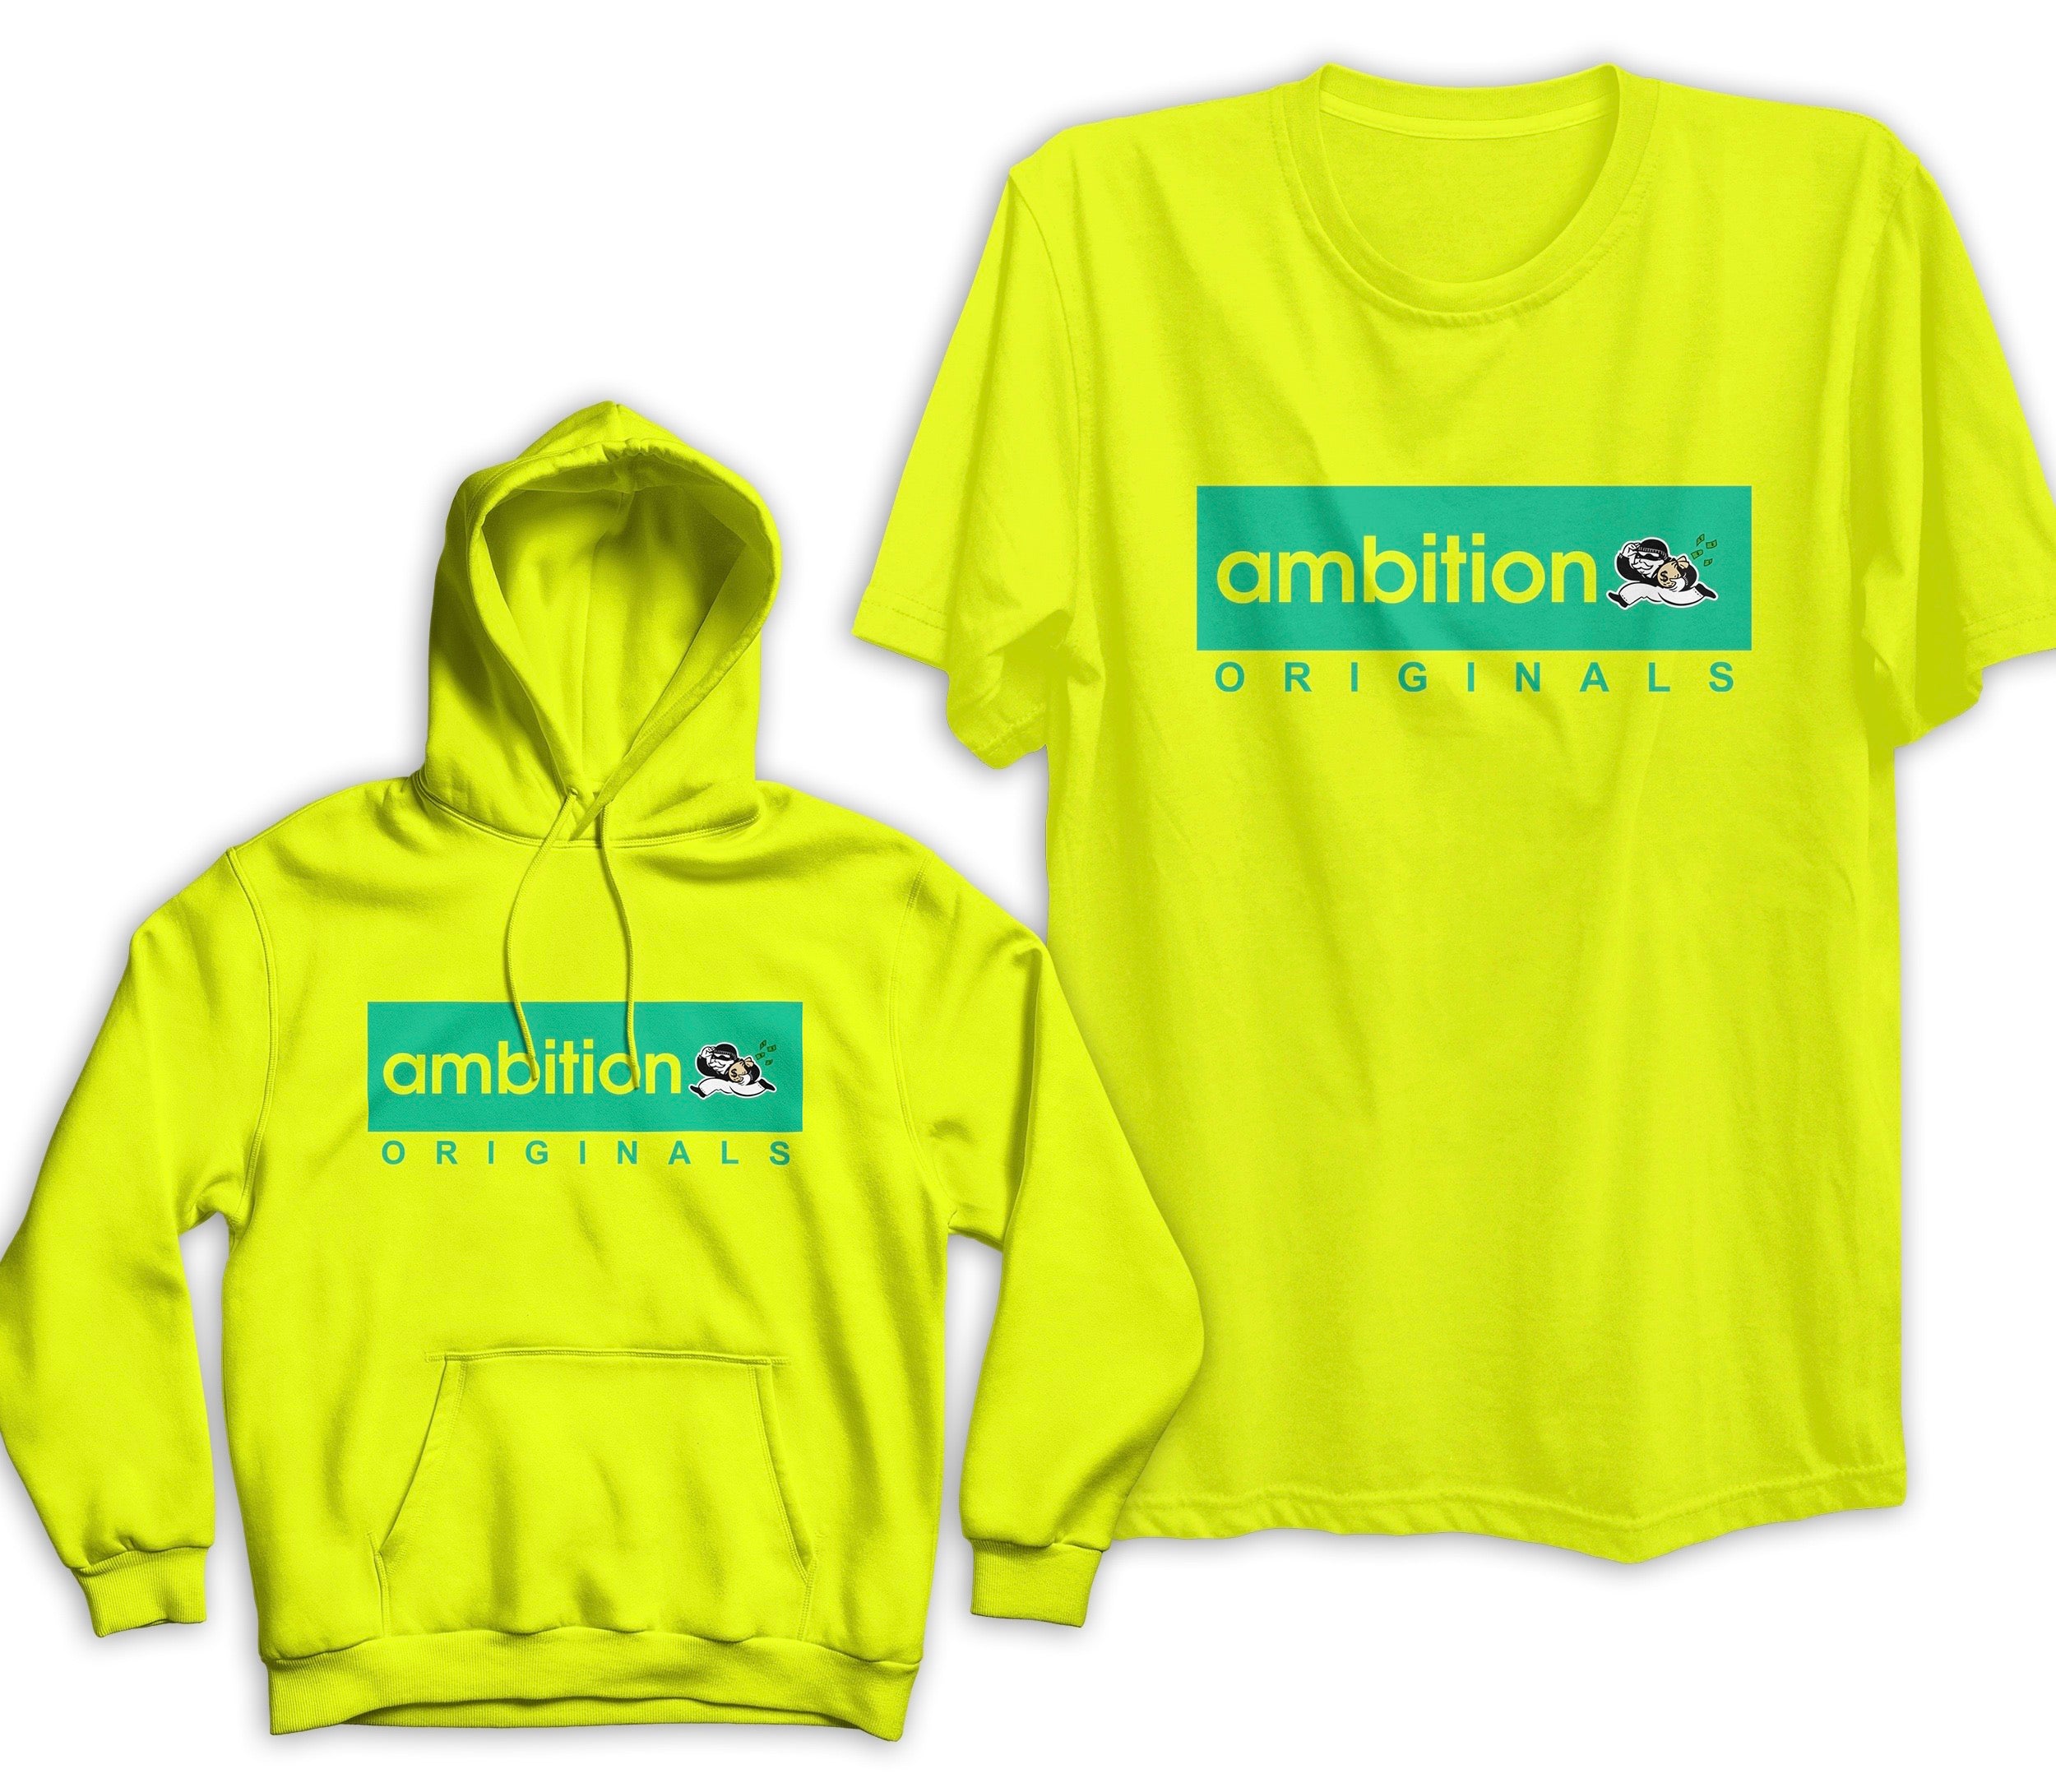 "AMBITION" Winter Bundle Package (Hoodie+T-Shirt)